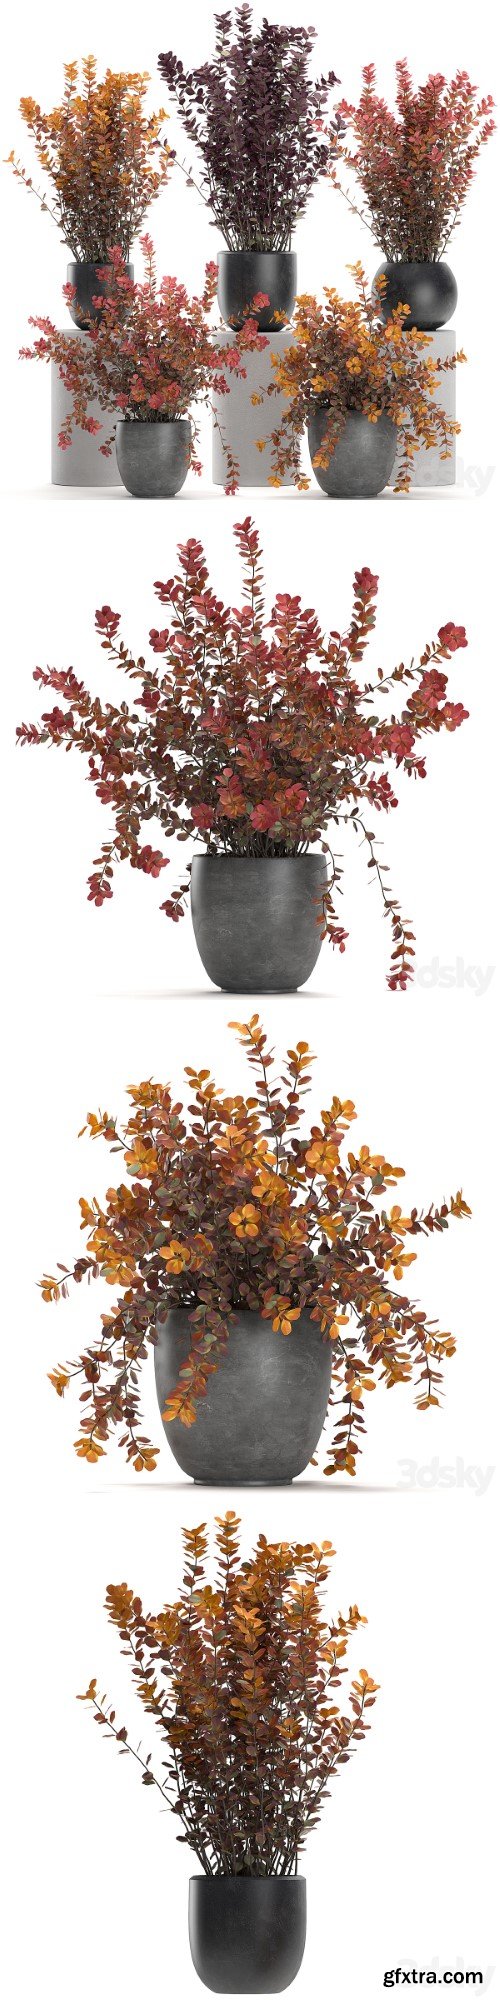 Plant collection 698. Barberry, bushes, garden, landscaping, outdoor flowerpot, autumn, dried flower, natural decor